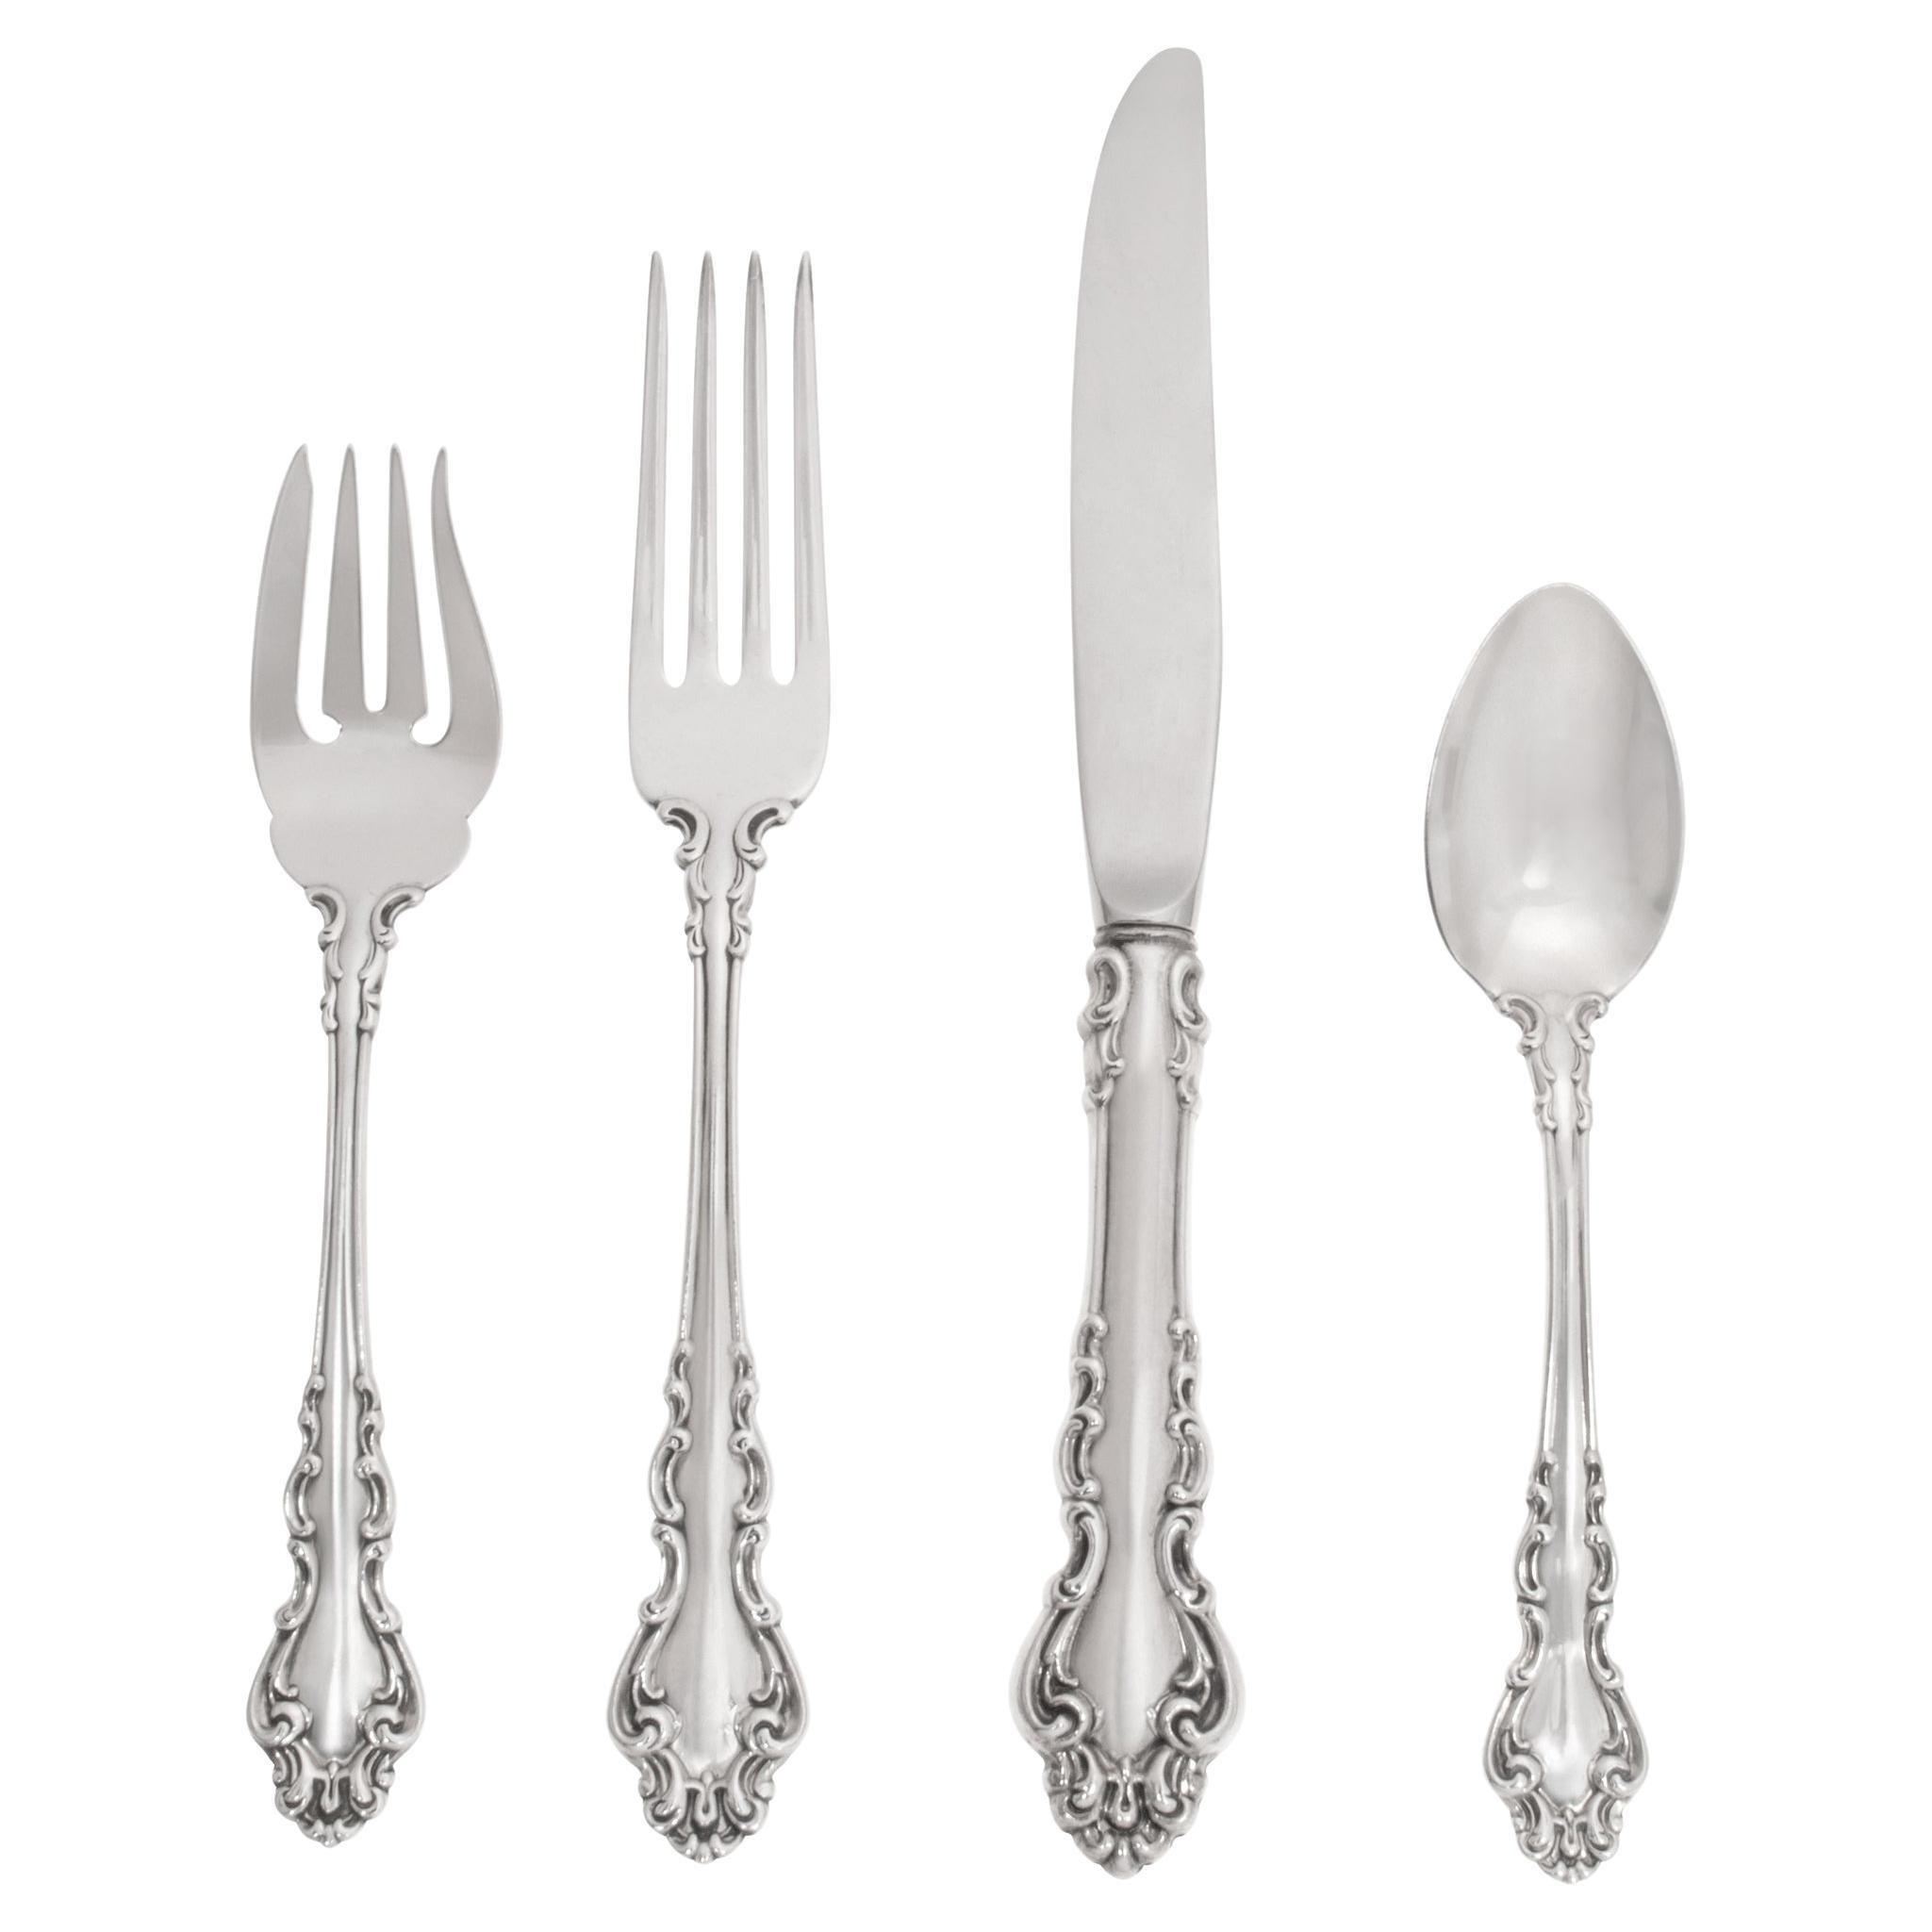 Spanish Baroque, Reed and Barton, Sterling Silver Flatware Set Patented in 1965